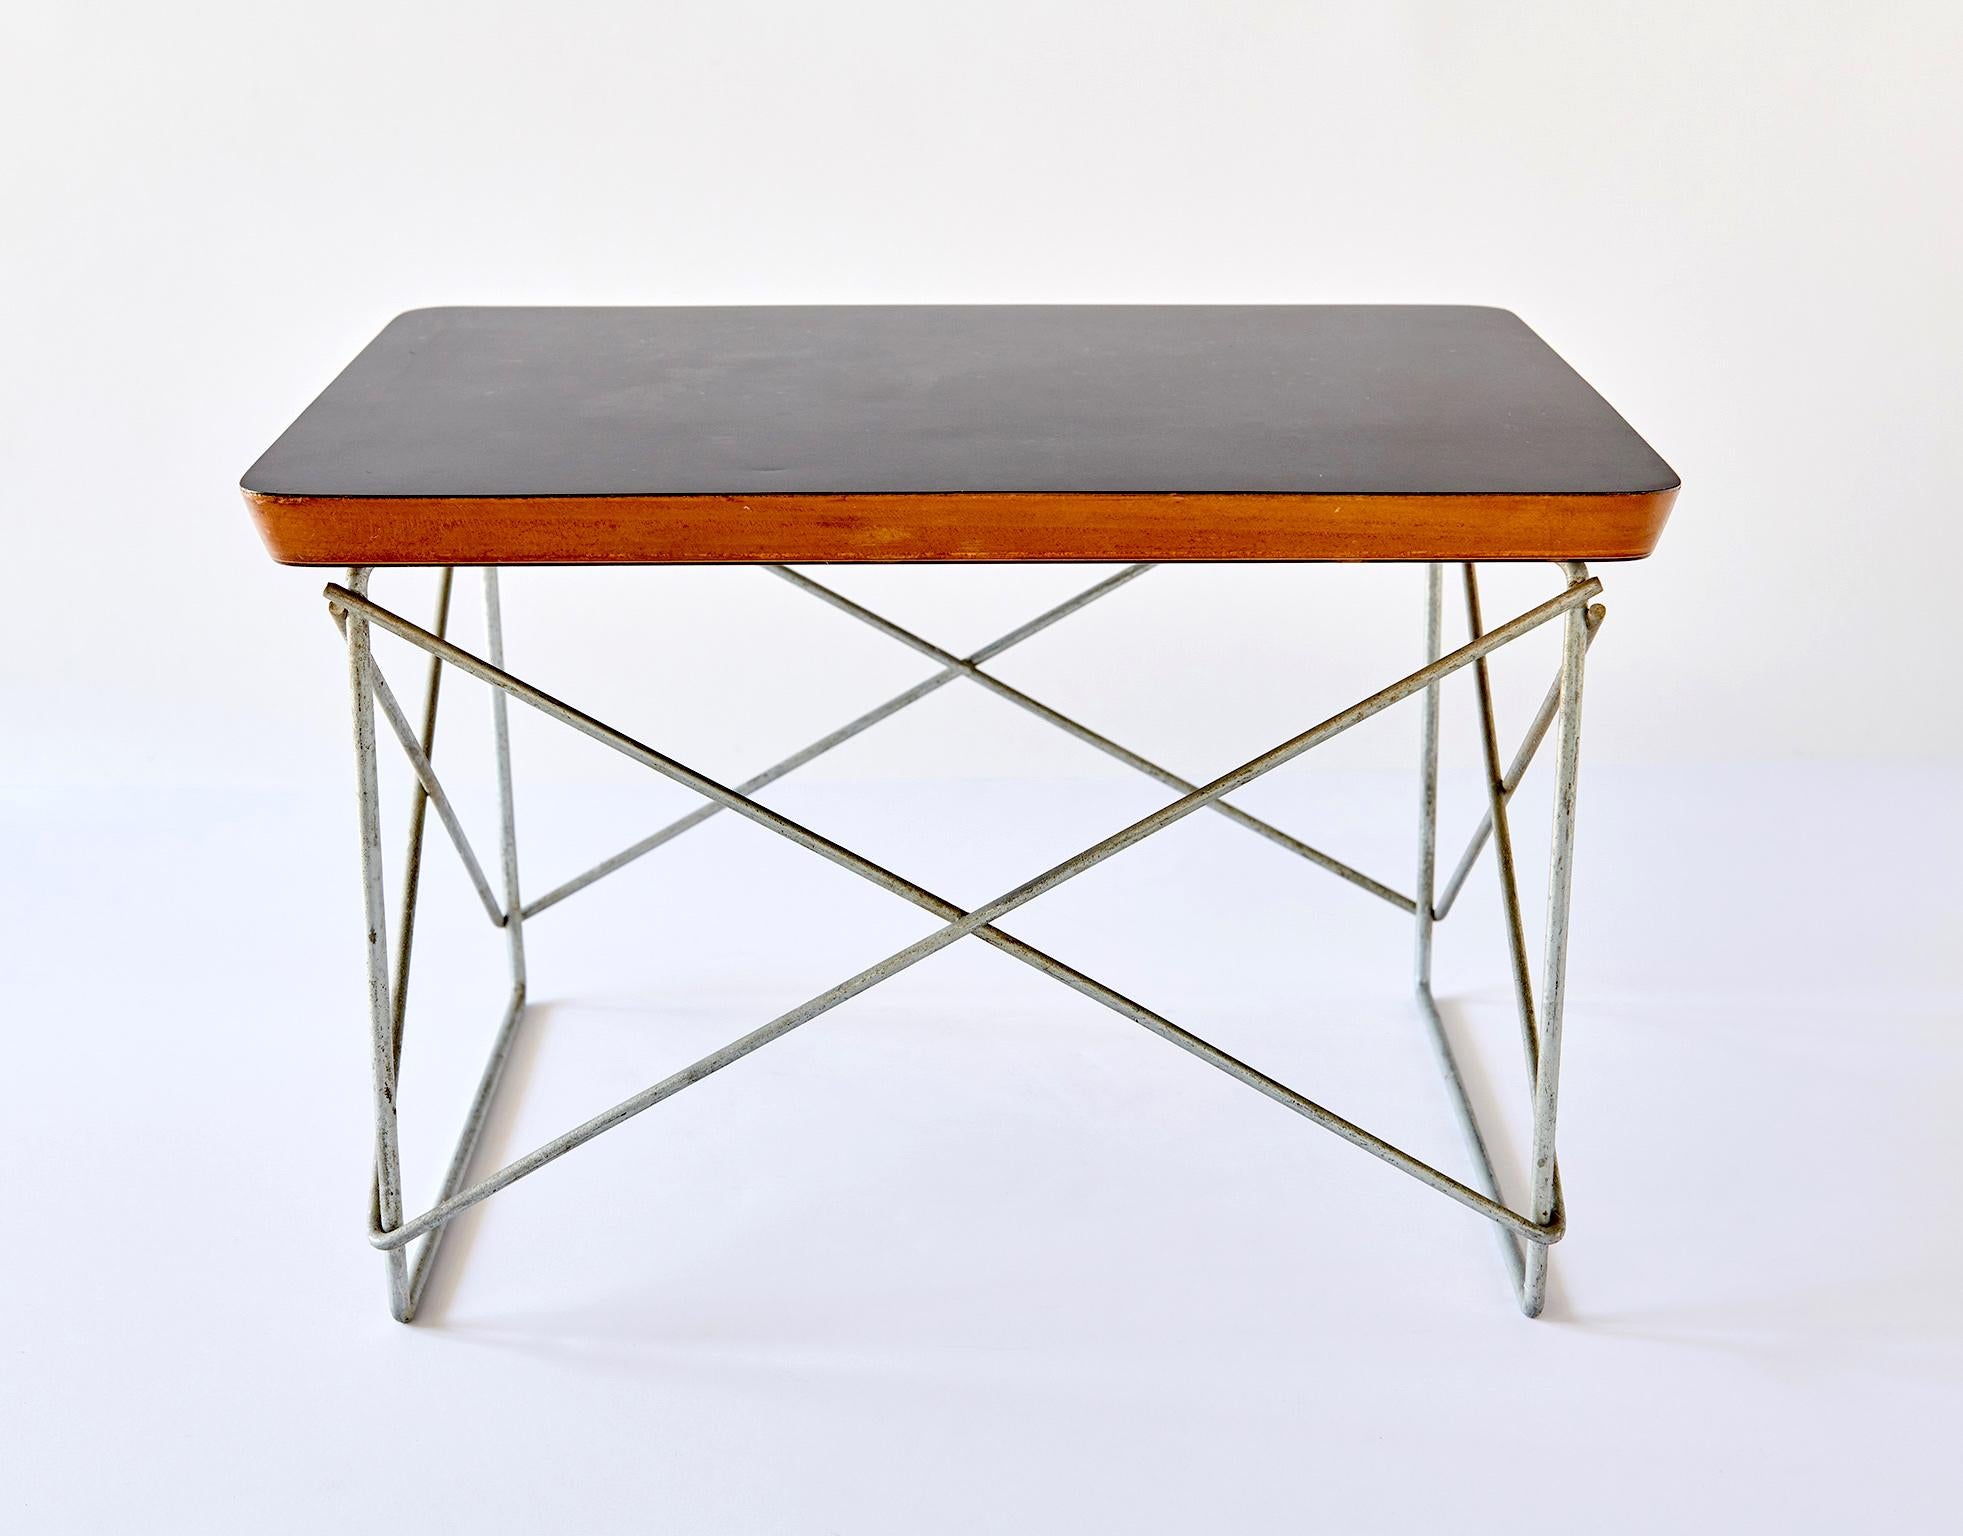 Charles and Ray Eames kept several of these 